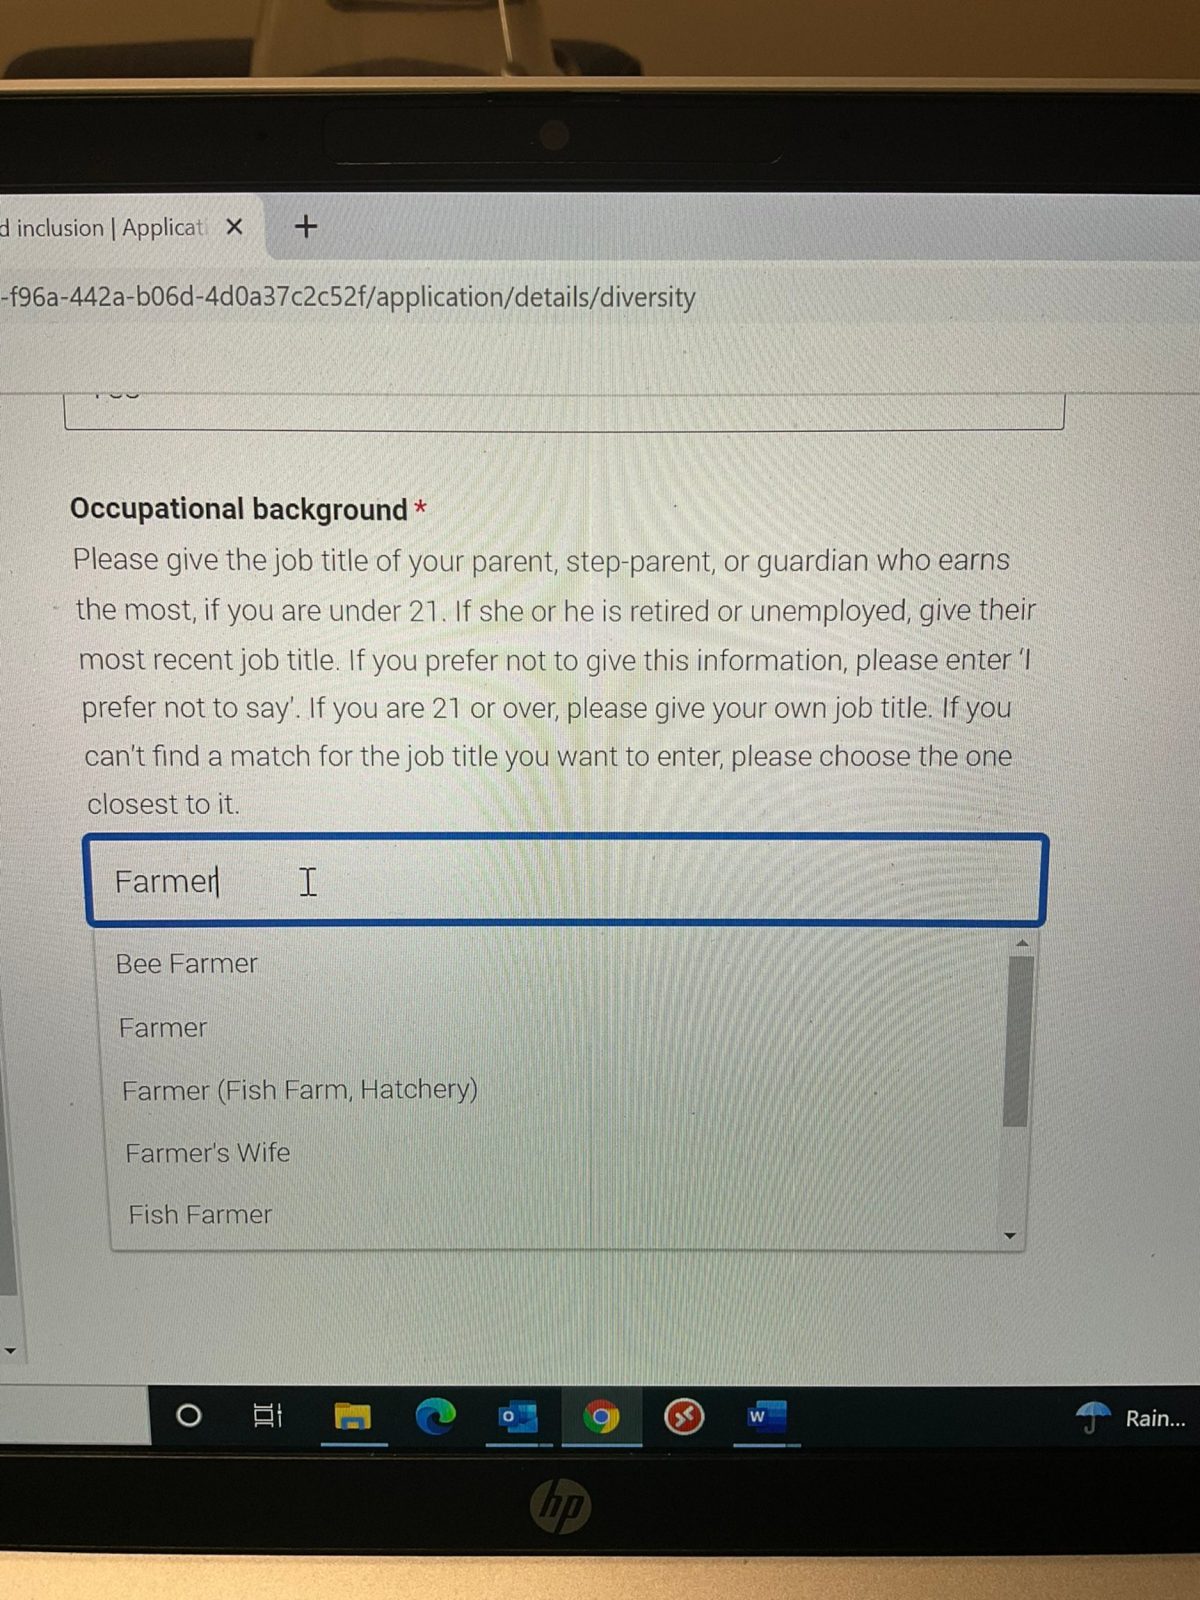 The UCAS form with the drop down option of "farmer's wife".